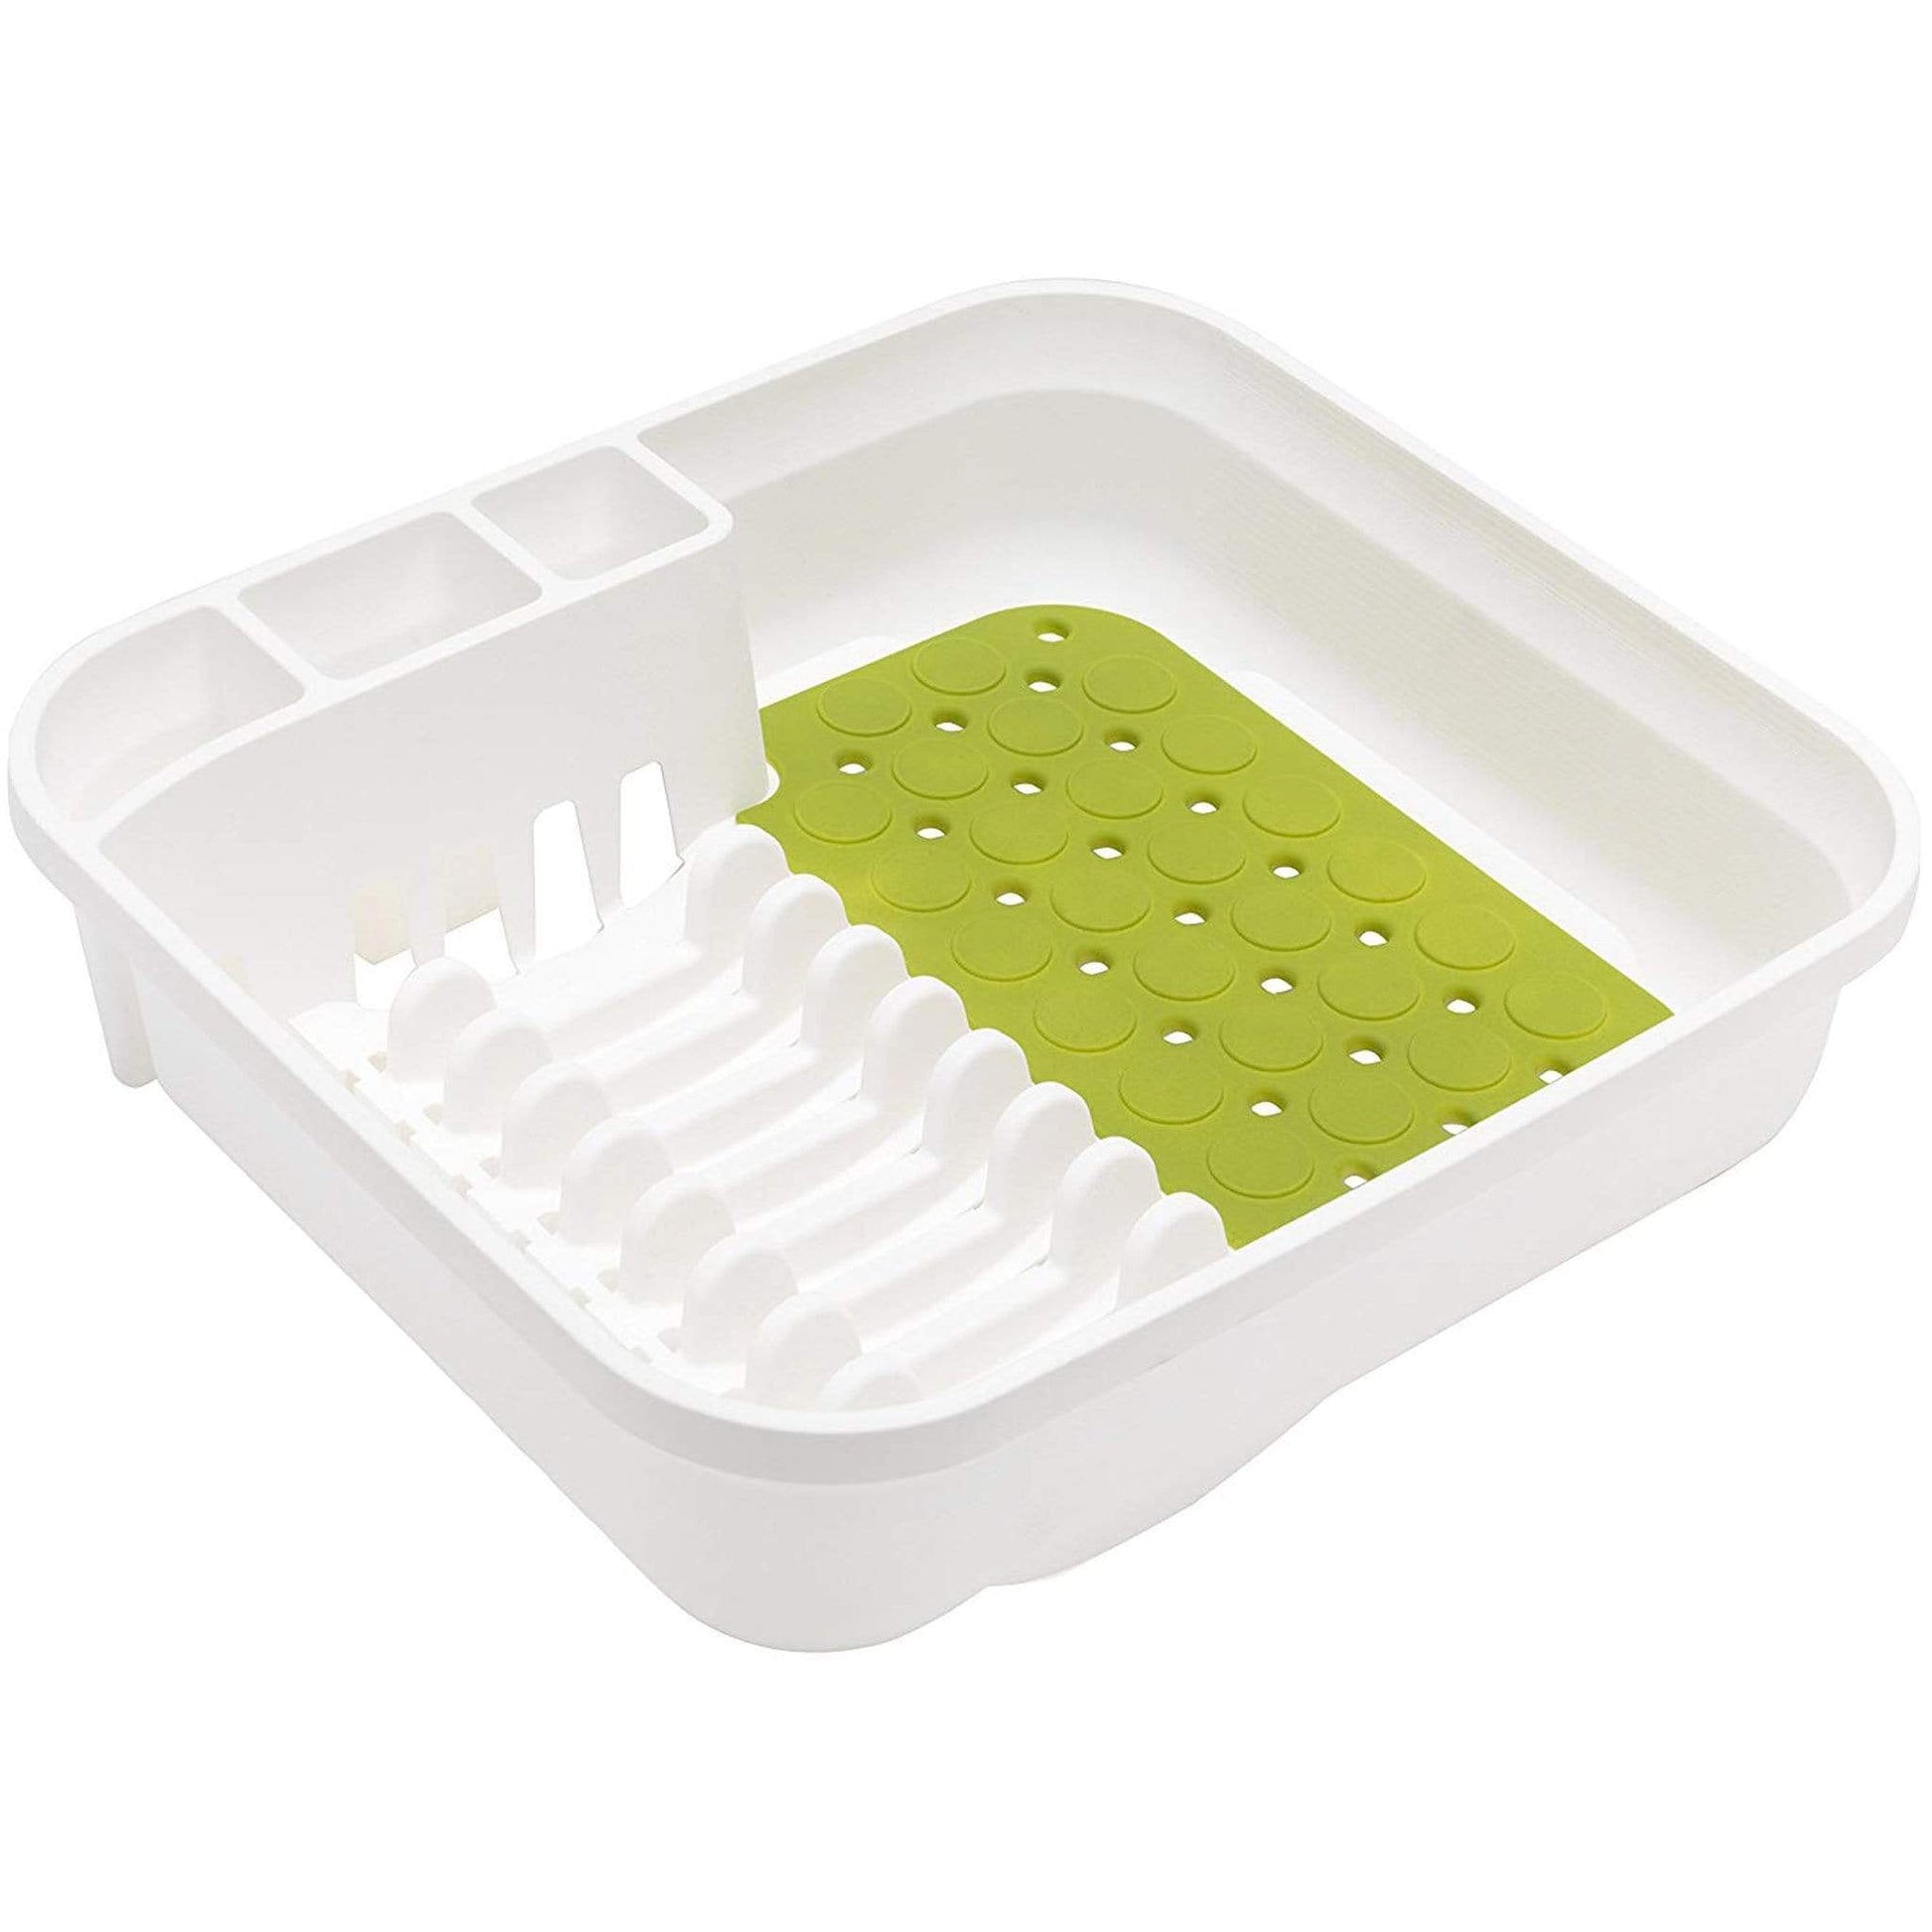 Kitchenware  -  Addis Draining Station In White And Green  -  50143273